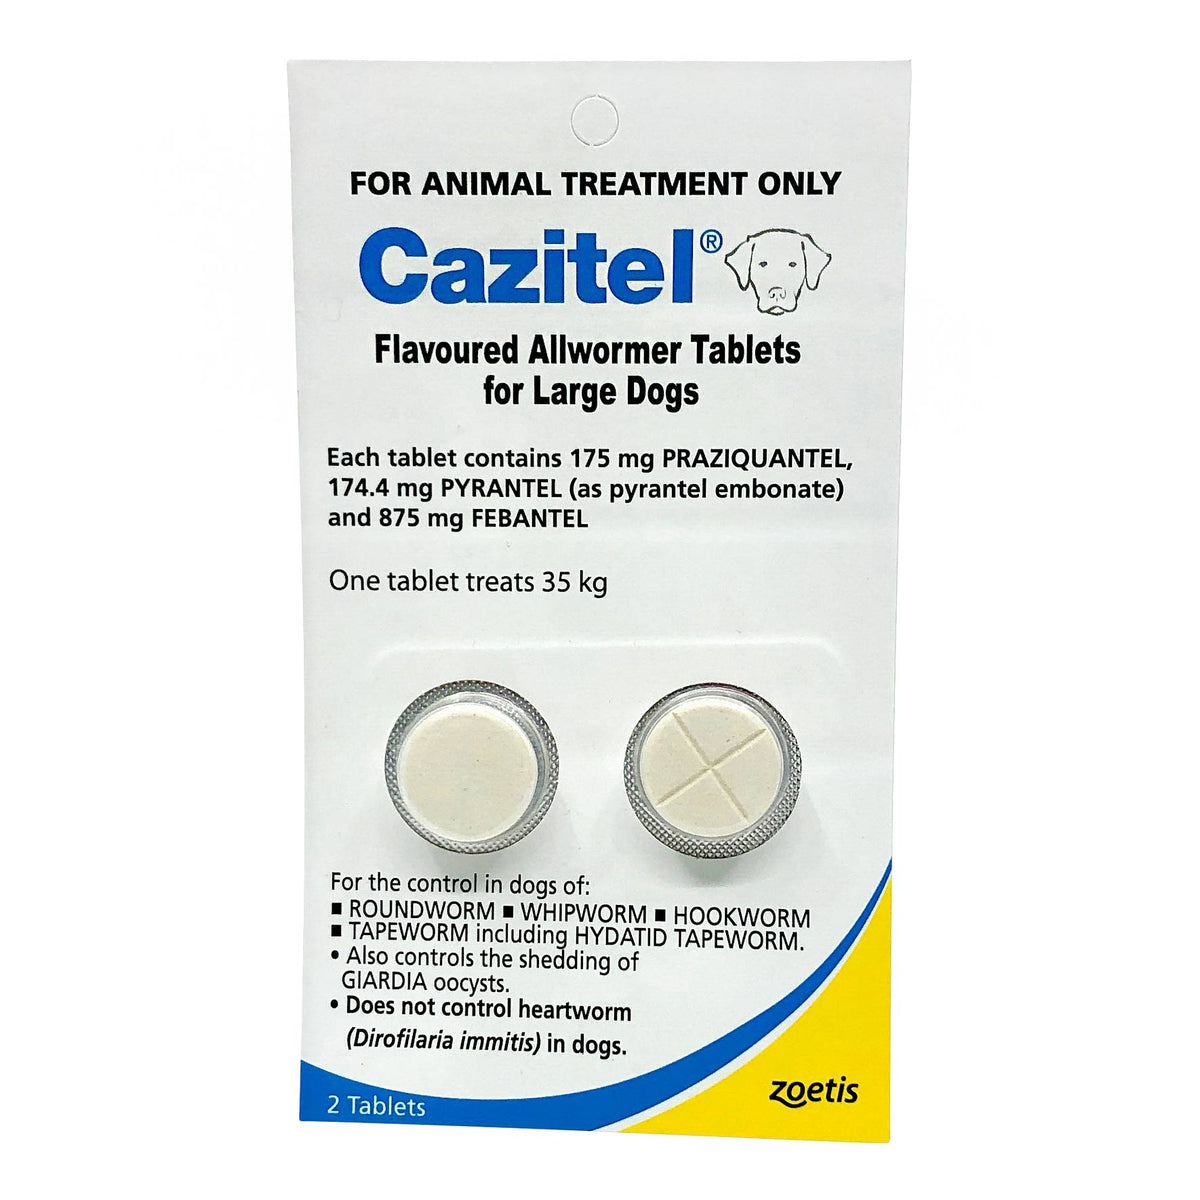 Cazitel Flavoured Allwormer Tablets for Dogs